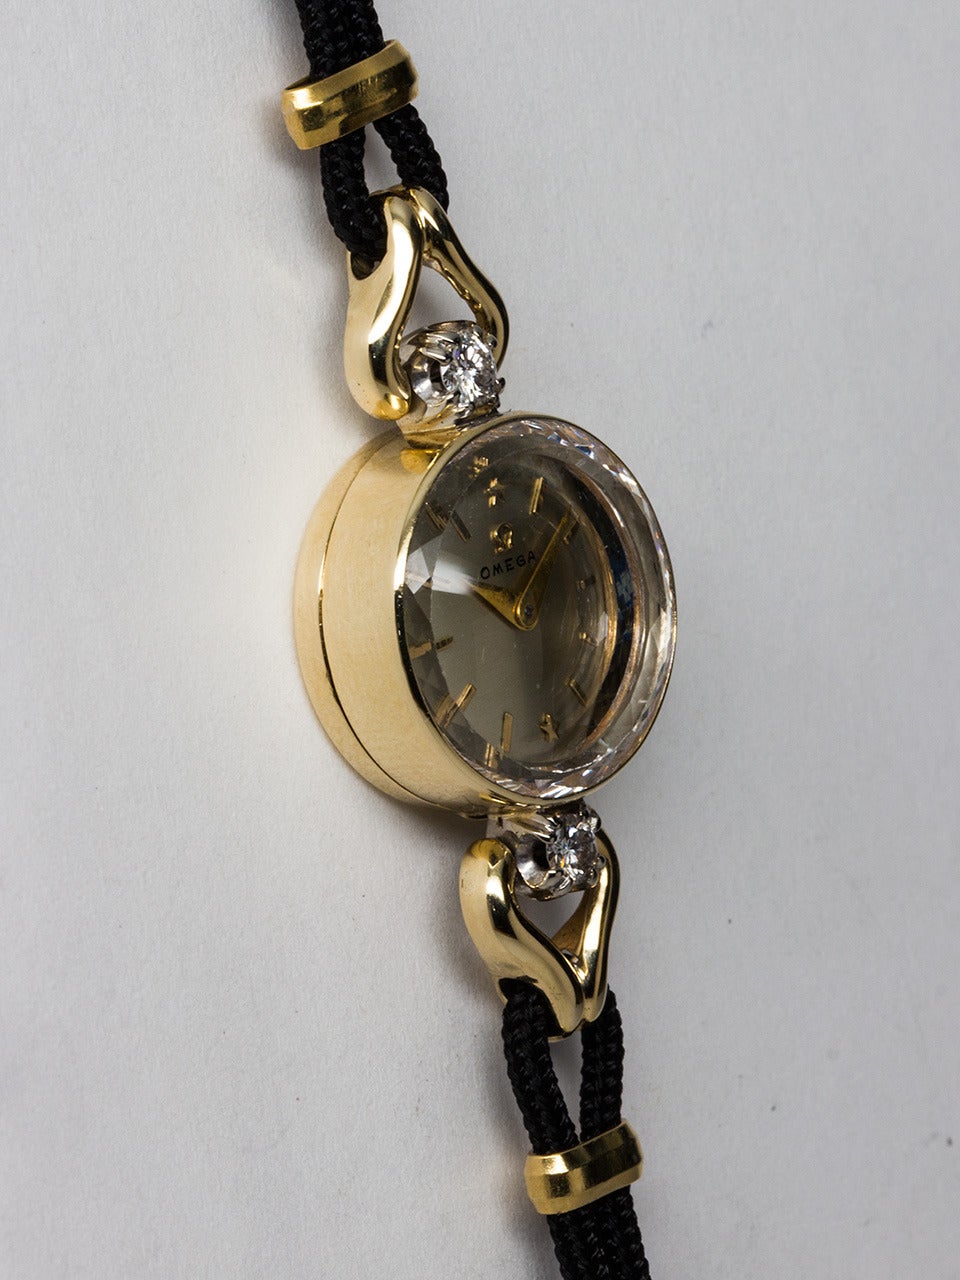 Lady Omega 14K Yellow Gold and Diamond Wristwatch circa 1950s. Diamond set round case 17 X 17mm with wish bone lugs. Original silvered satin dial with gold applied indexes, applied gold Omega logo and tapered sword hands. Shown on black silk and